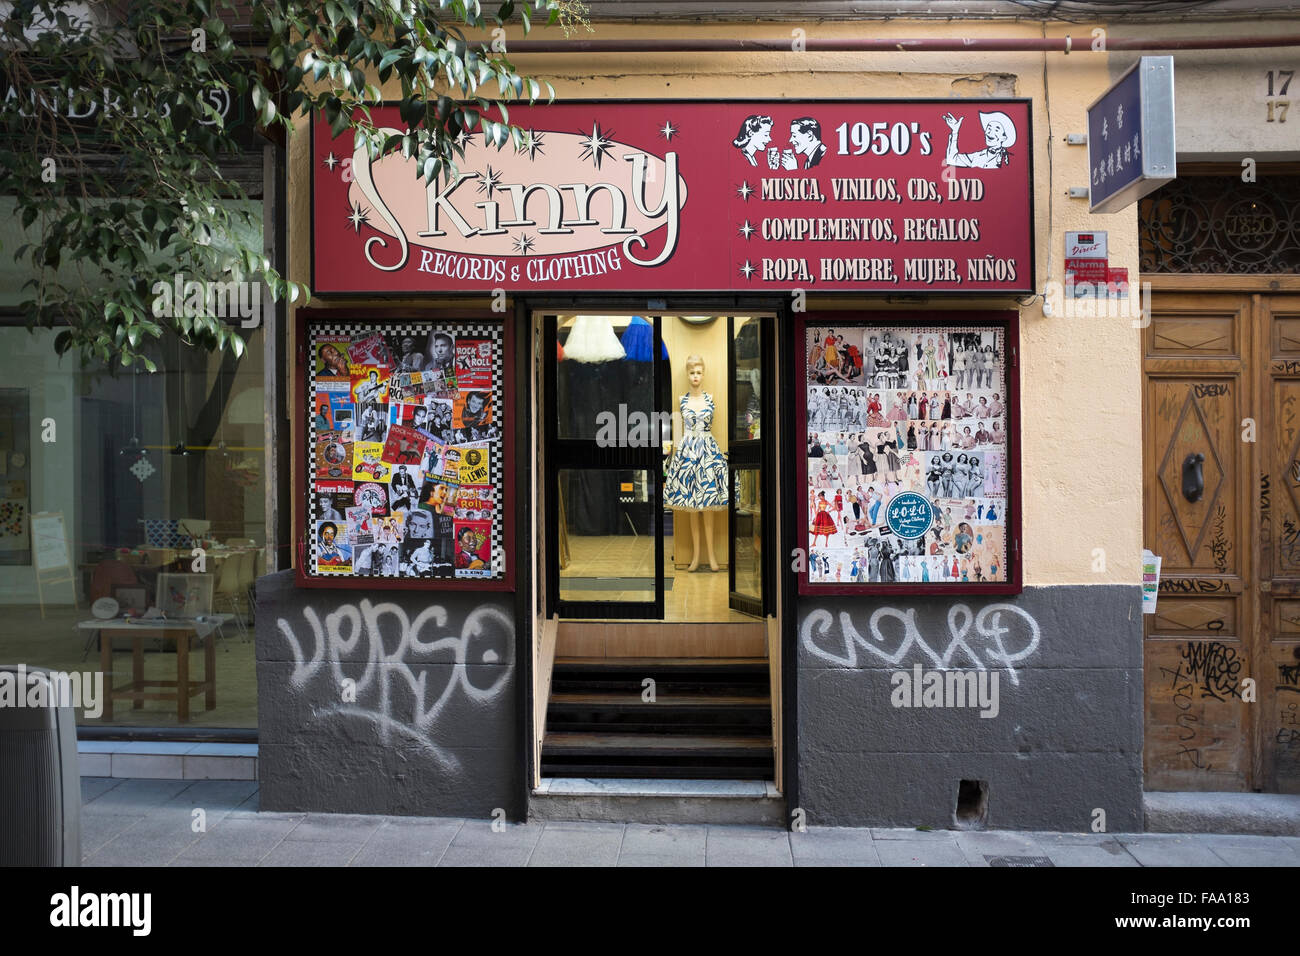 Skinny Records and Clothing Shop Madrid Stock Photo